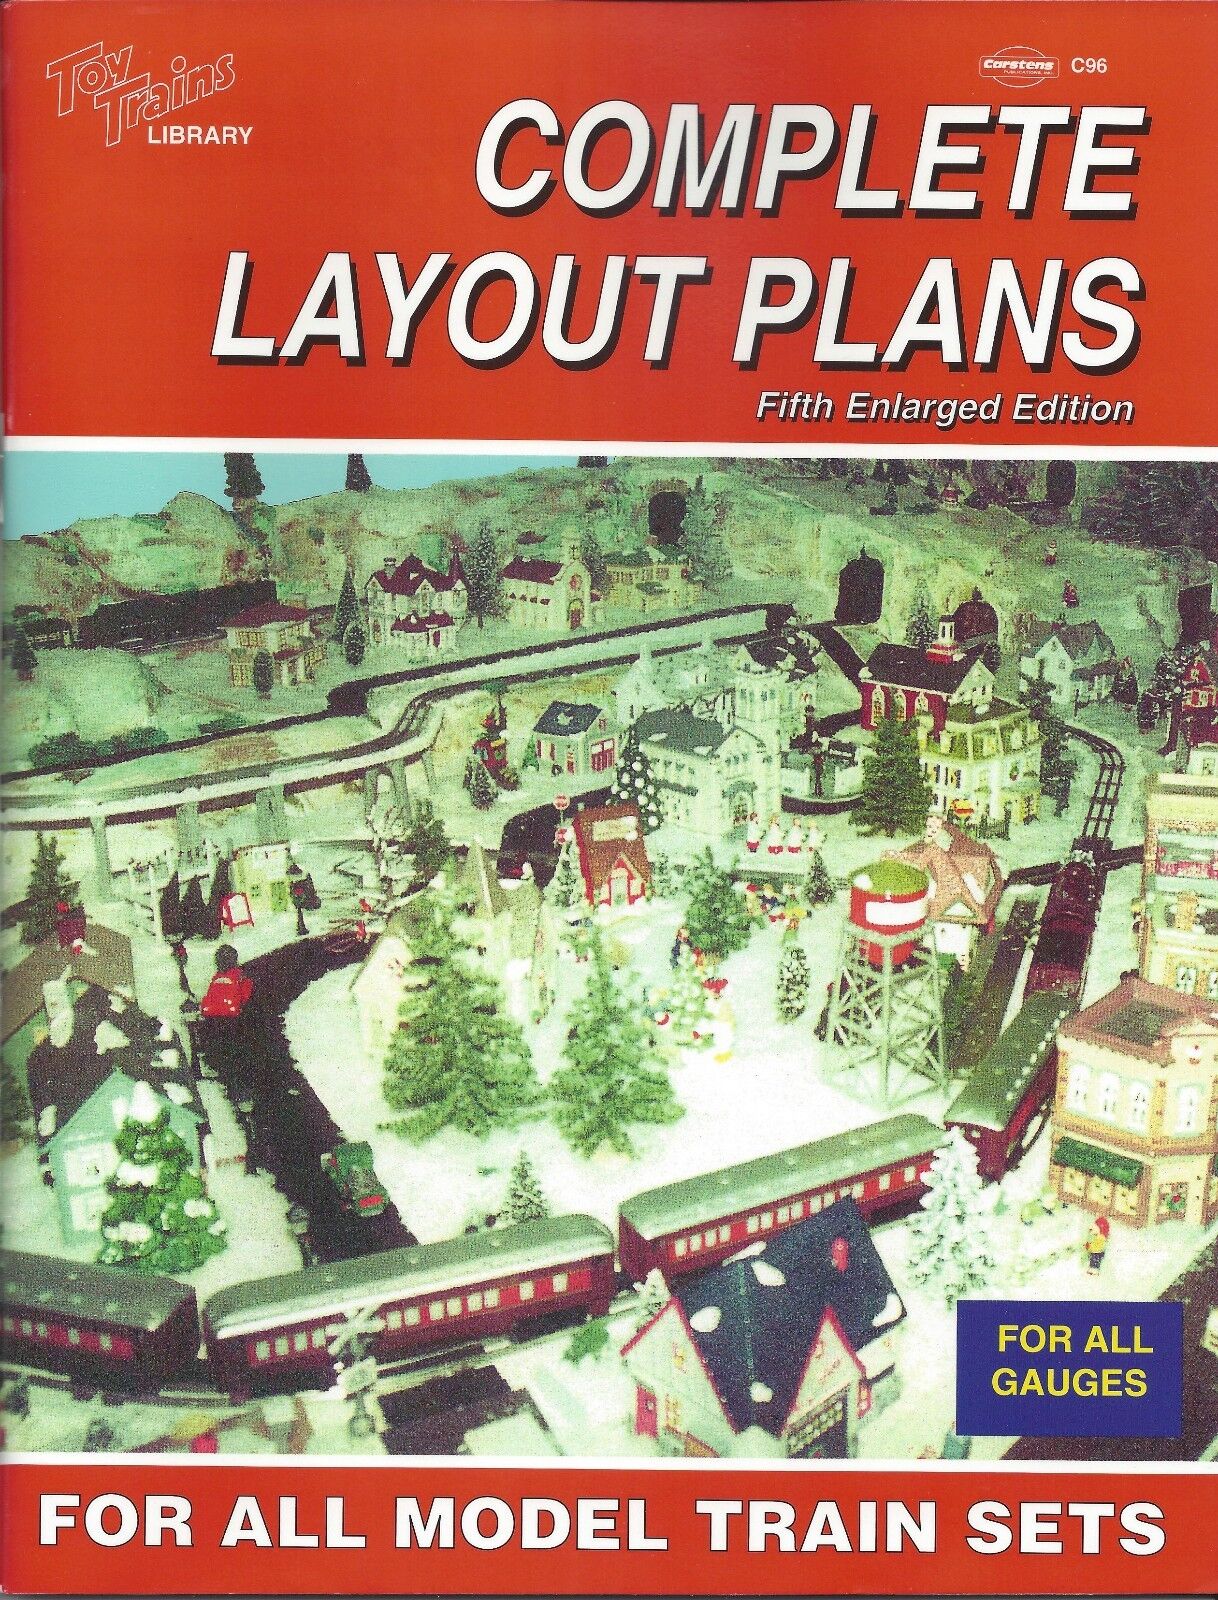 TRACK LAYOUT PLANS For Model Trains (regardless of model, gauge, scale) NEW BOOK